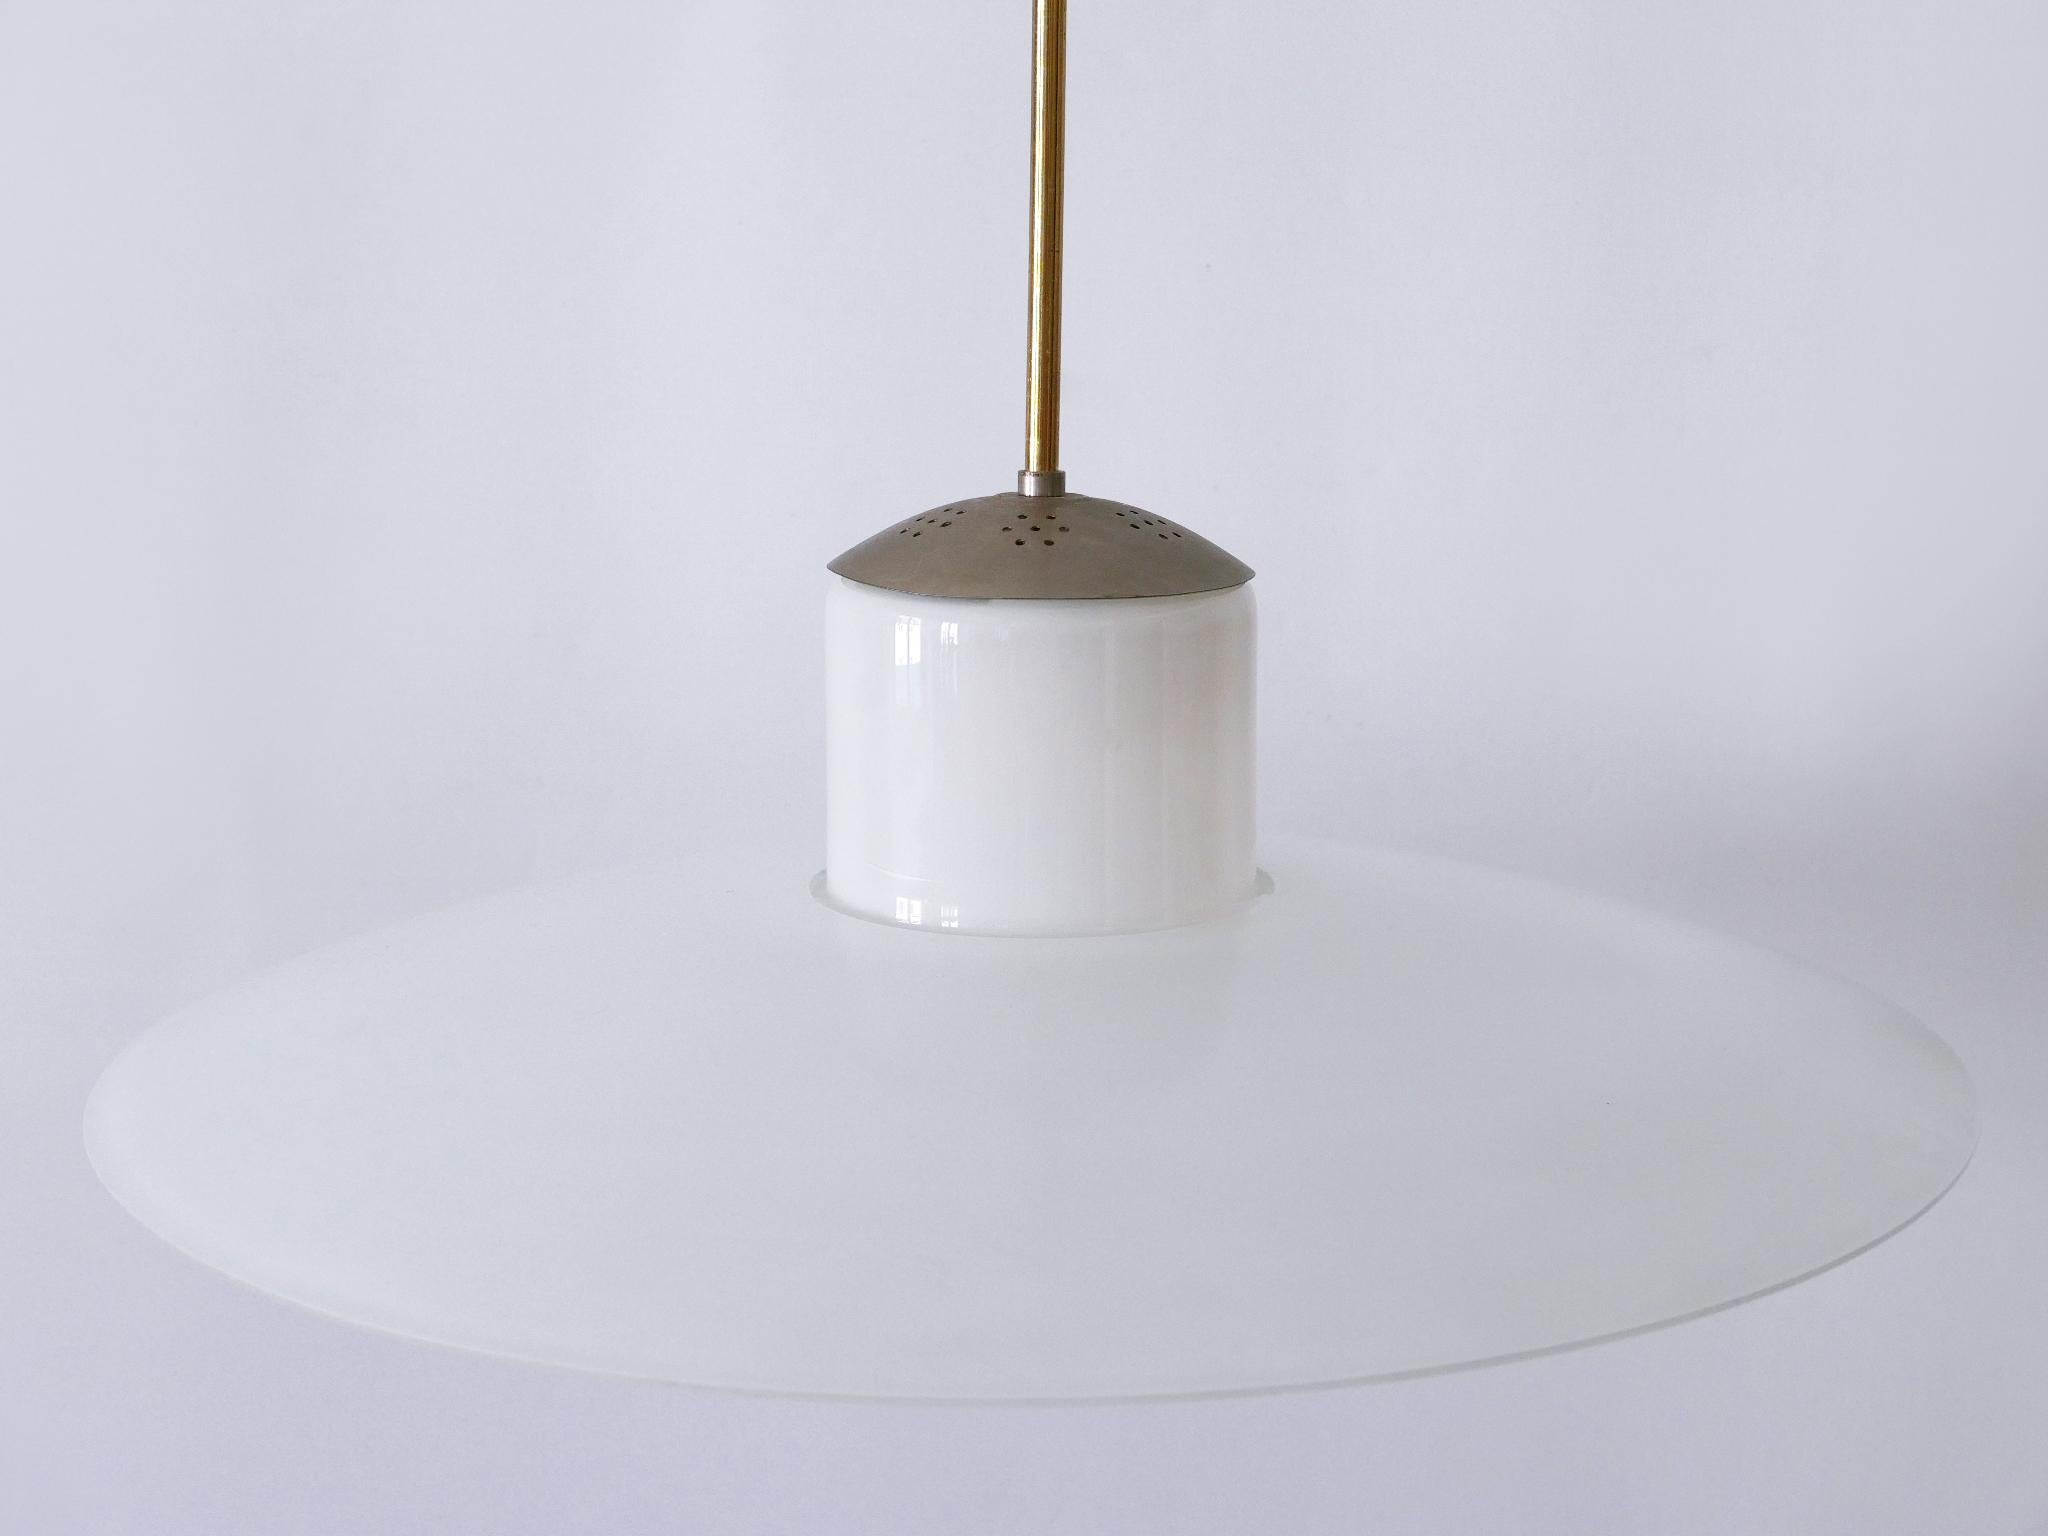 Rare Mid-Century Modern Pendant Lamp by Wolfgang Tümpel for Doria Germany 1950s For Sale 13